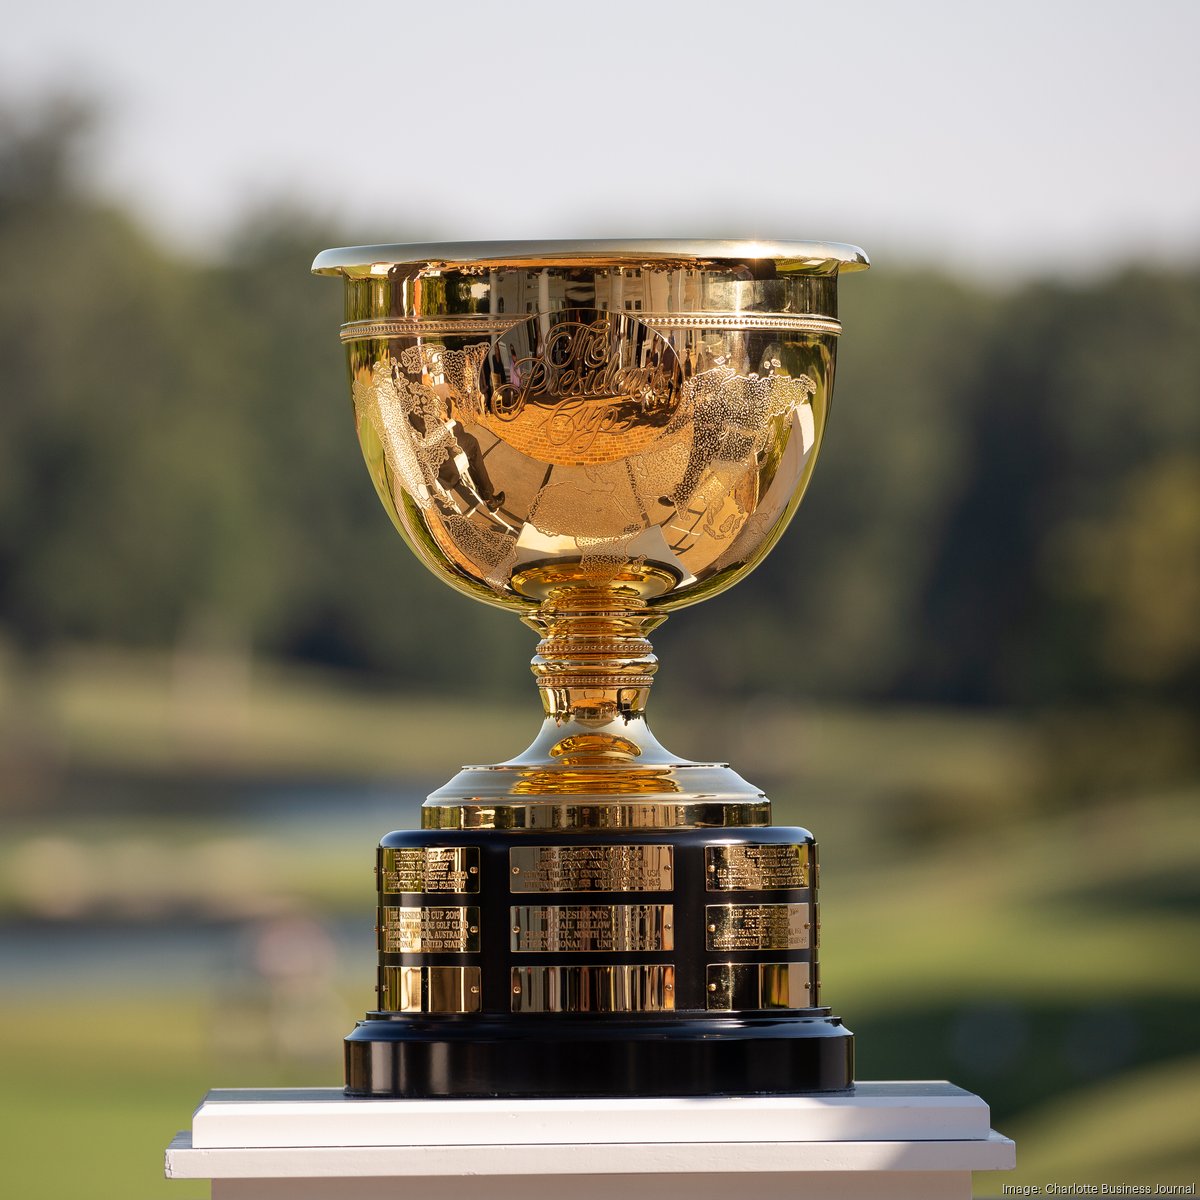 Organizers expect record sales to continue for Presidents Cup at Quail Hollow Club